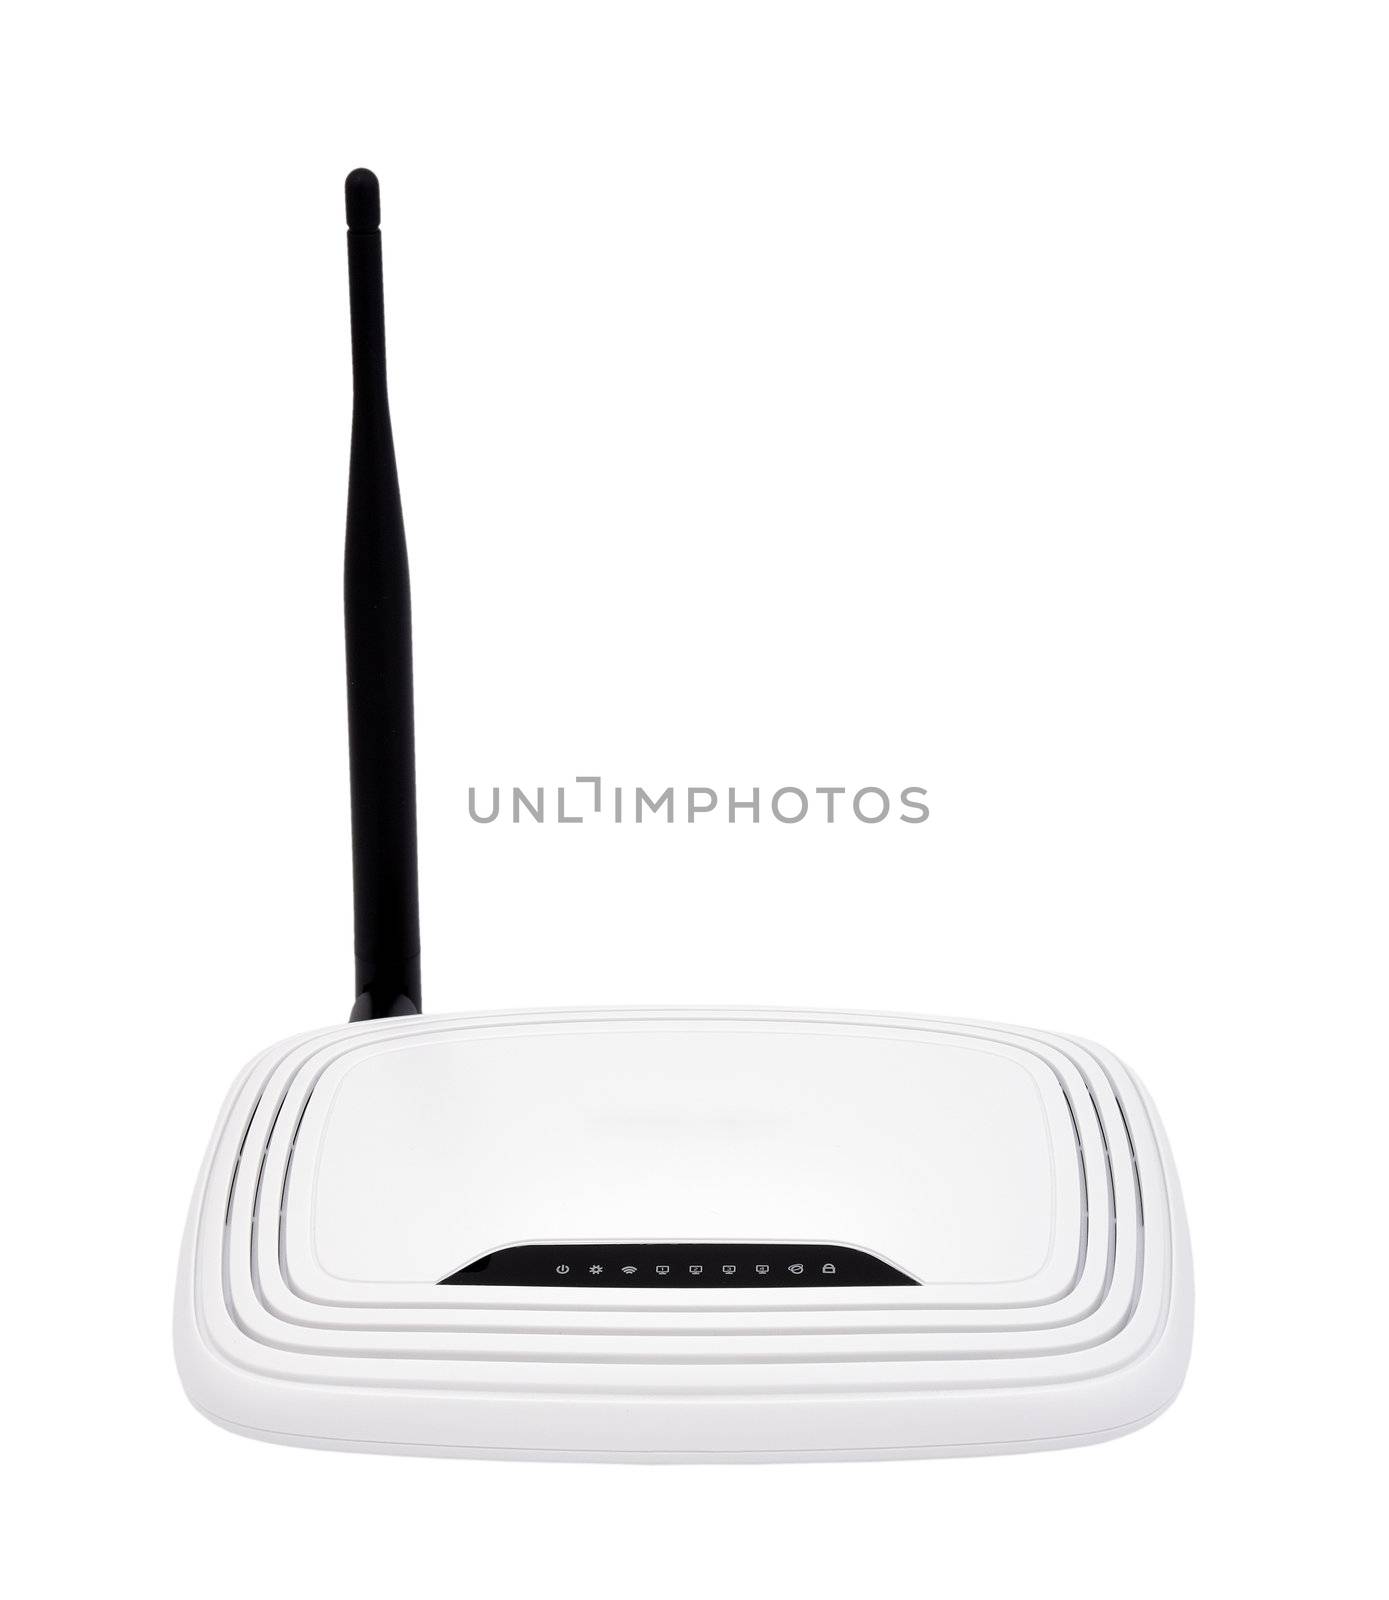 Wireless router on a white background